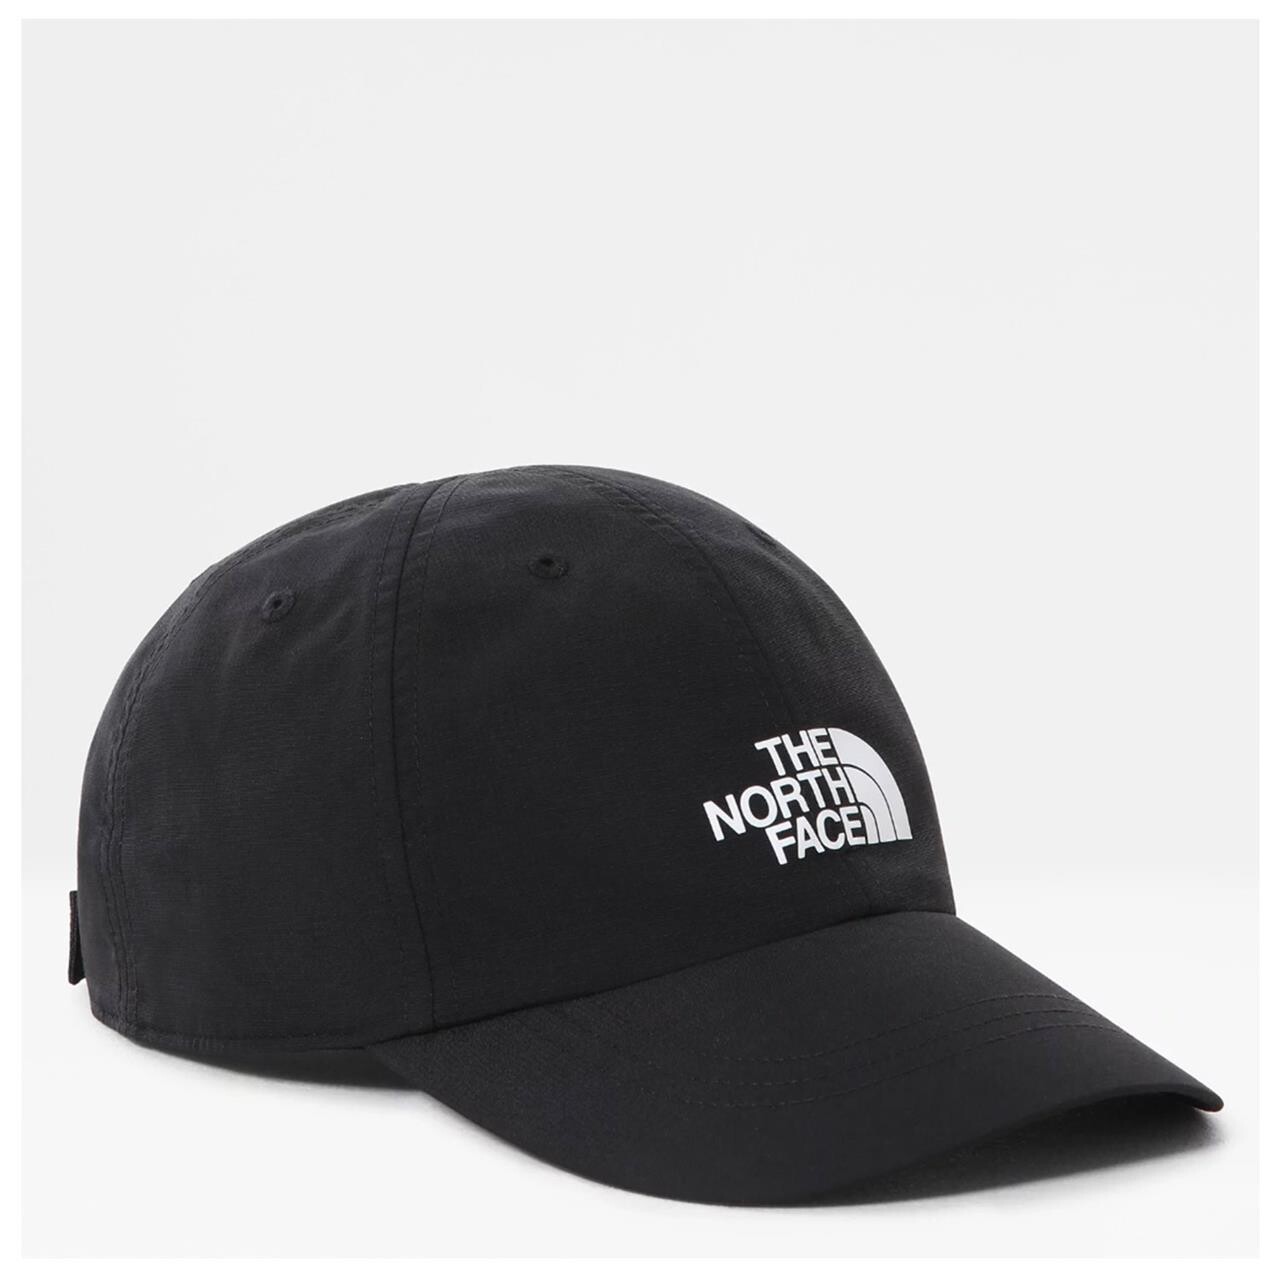 The North Face Horizon Hat (Sort (TNF BLACK) One size)